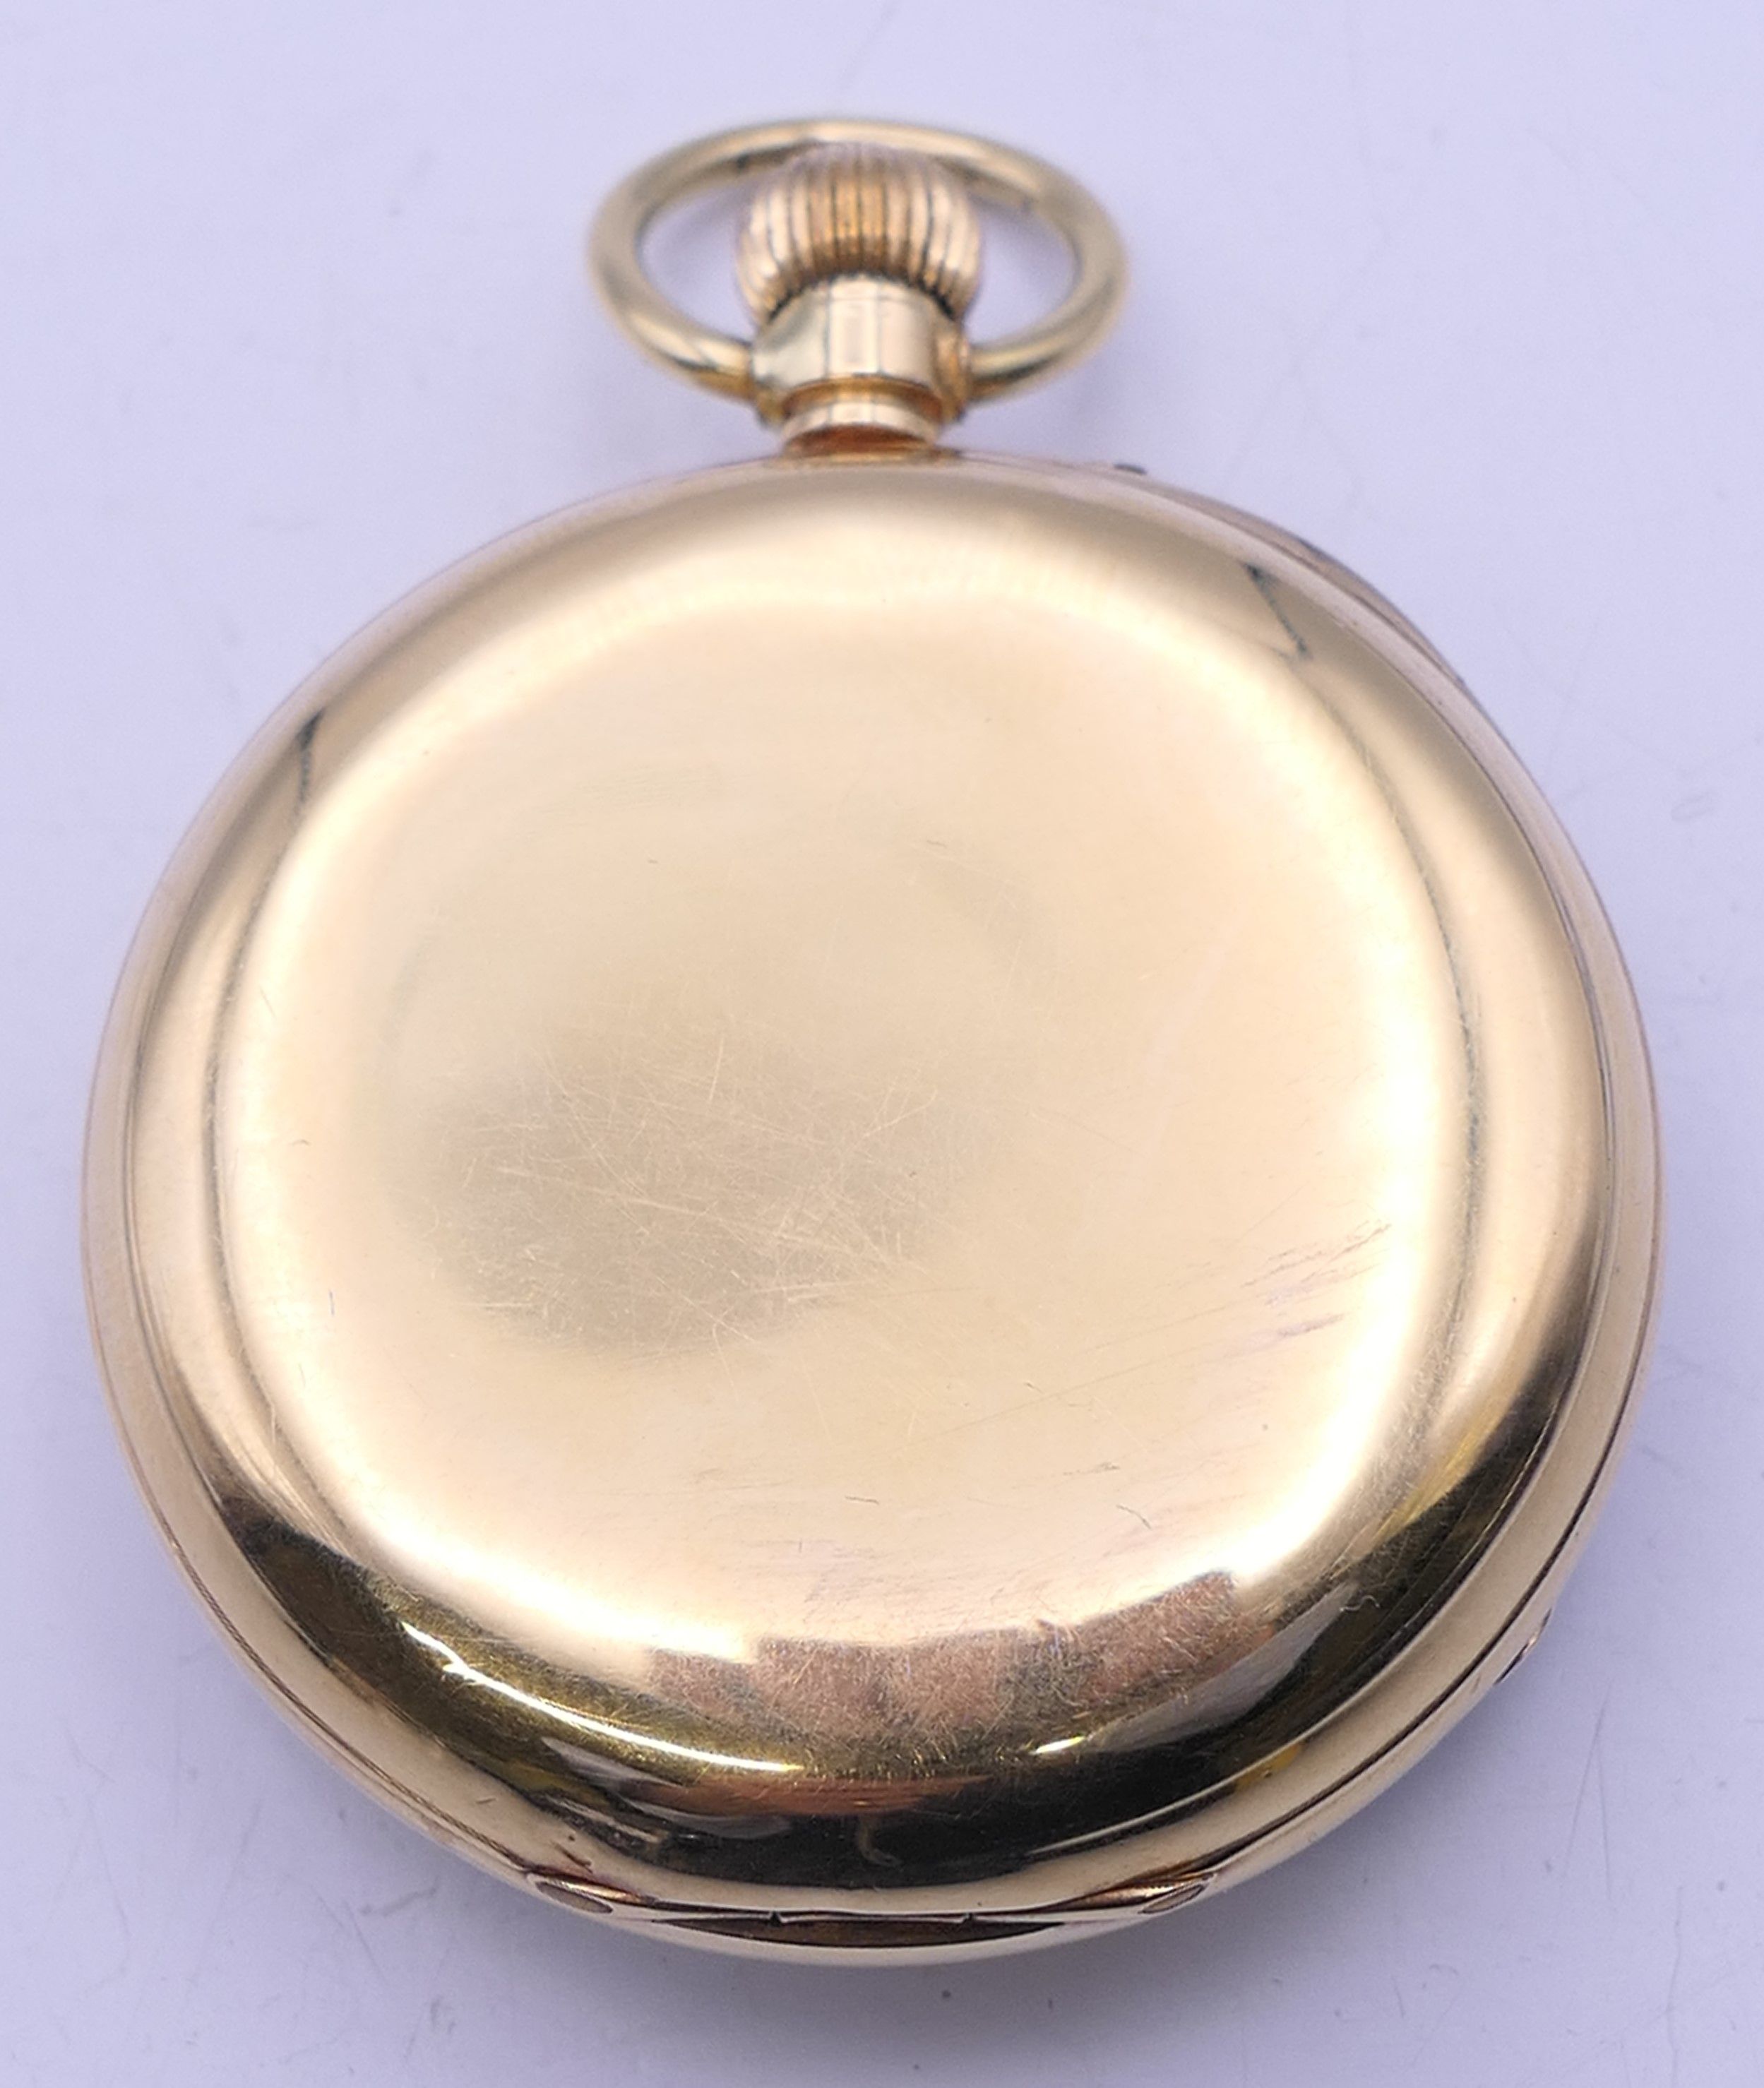 An 18 ct gold pocket watch with florally engraved dial, serial number 15514. 4.25 diameter. - Image 3 of 8